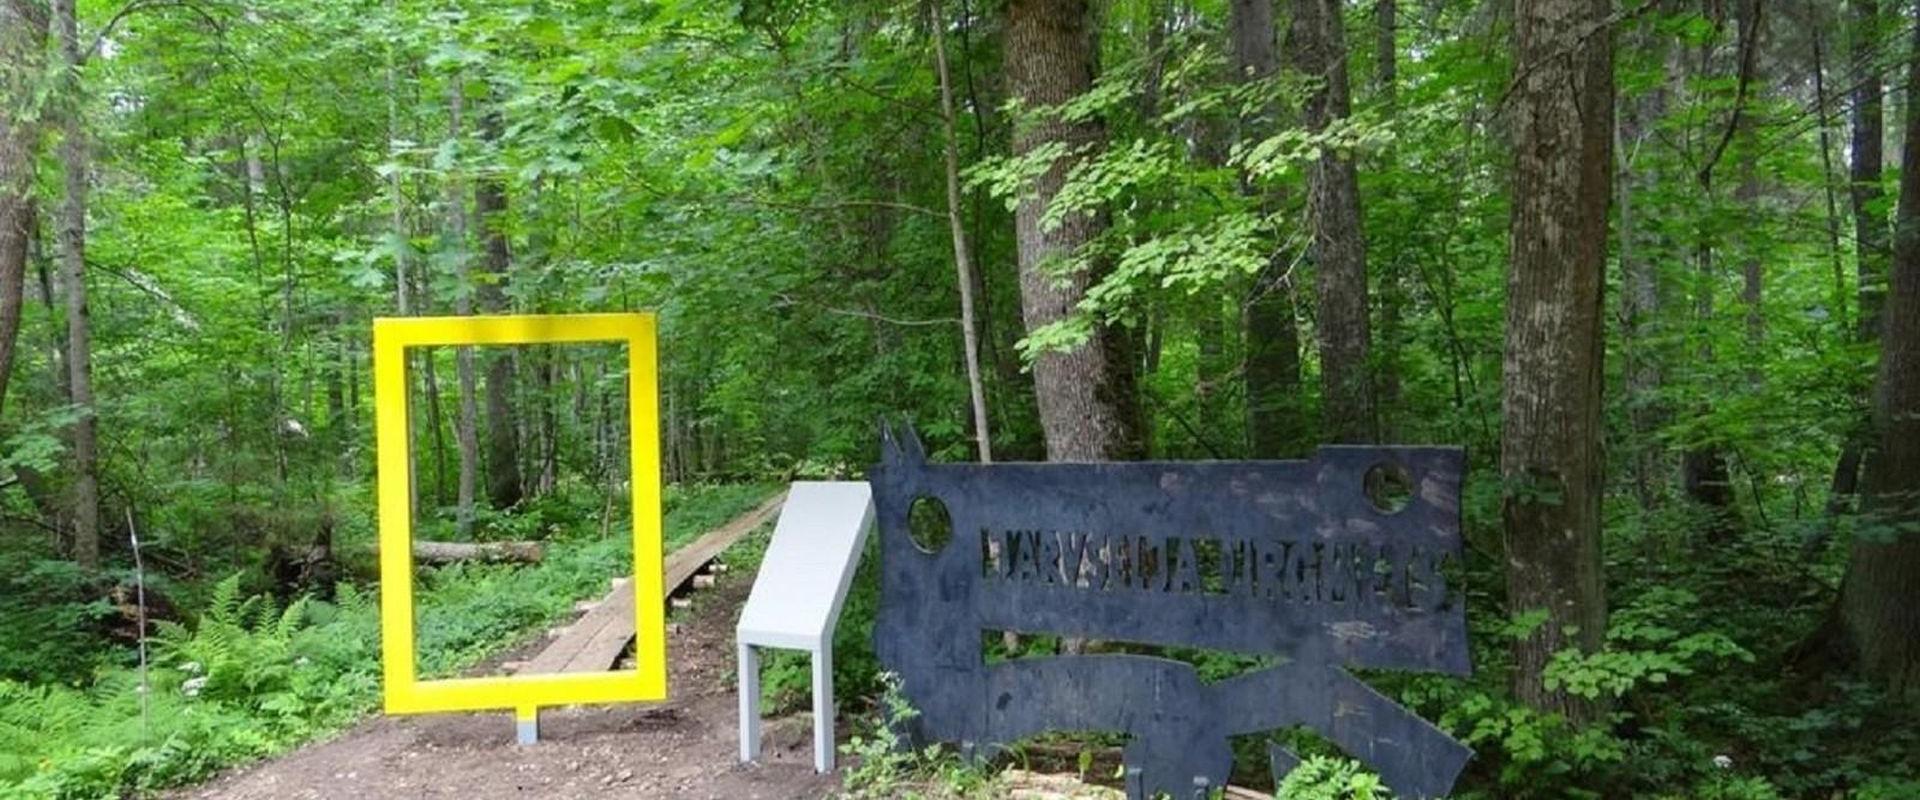 Järvselja nature study trail introduces the forest surrounding the centre of forestry and research. The trail is diverse and passes through a number o